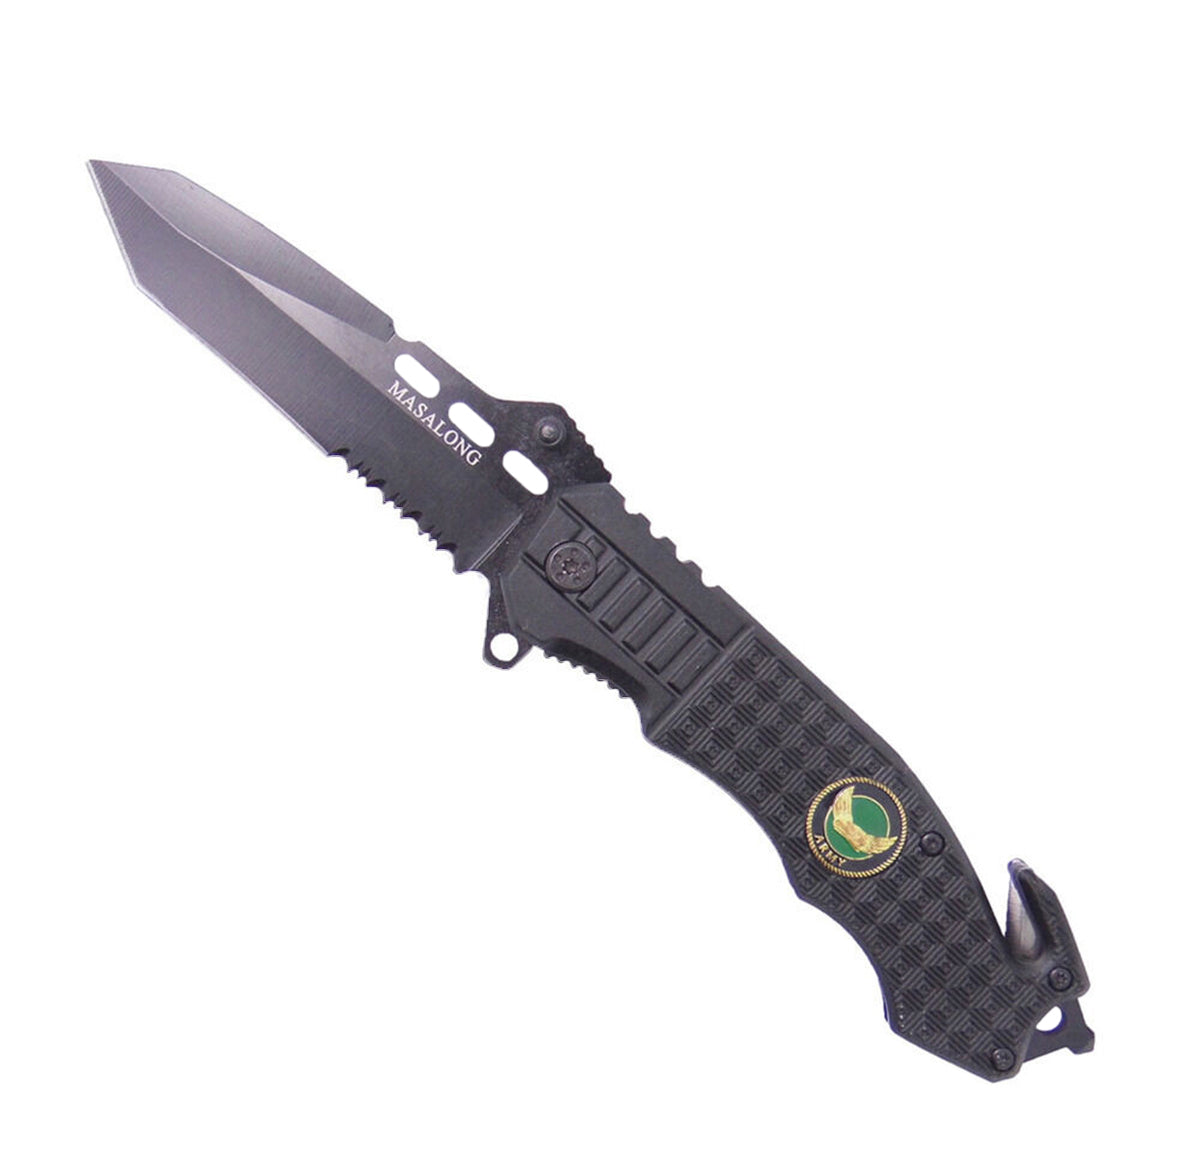 MASALONG Kni29 Hunting Survival Outdoor Folding Tactical Rescue Pocket Knife Saw Glass Chisel